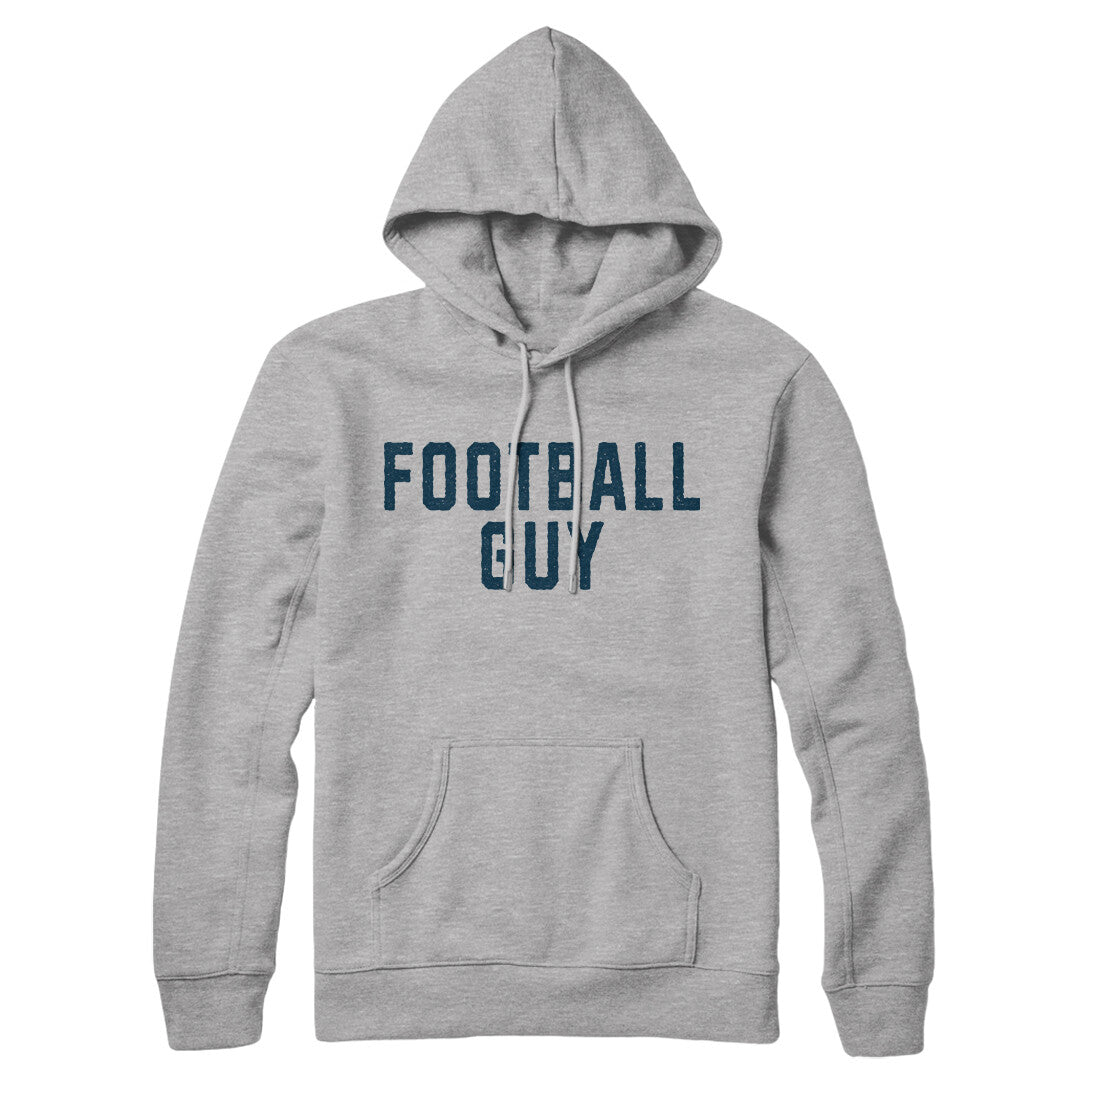 Football Guy in Heather Grey Color